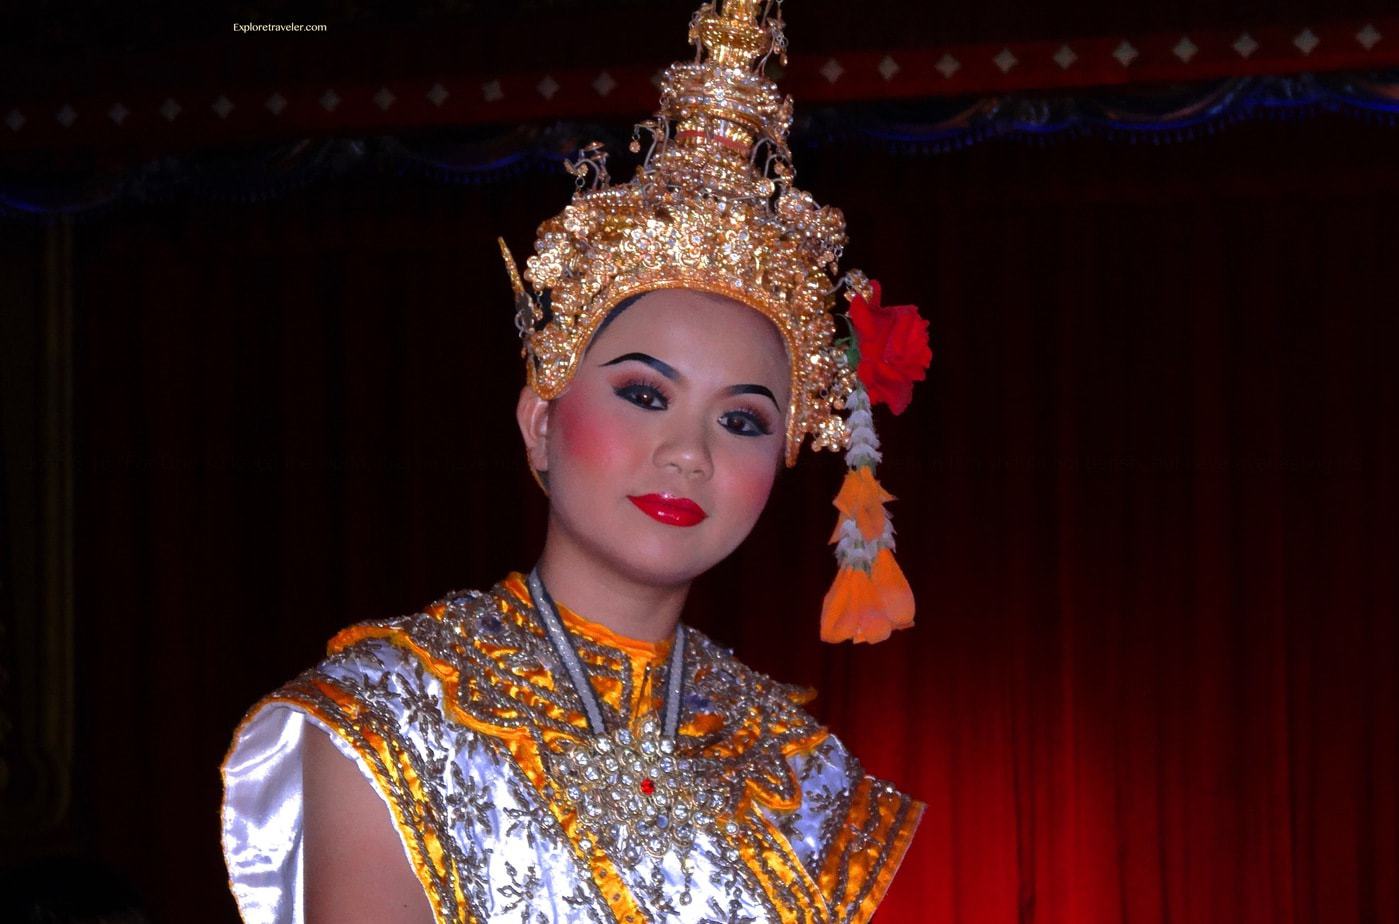 The traditional Thai Dance dates back to ancient Siamese times.